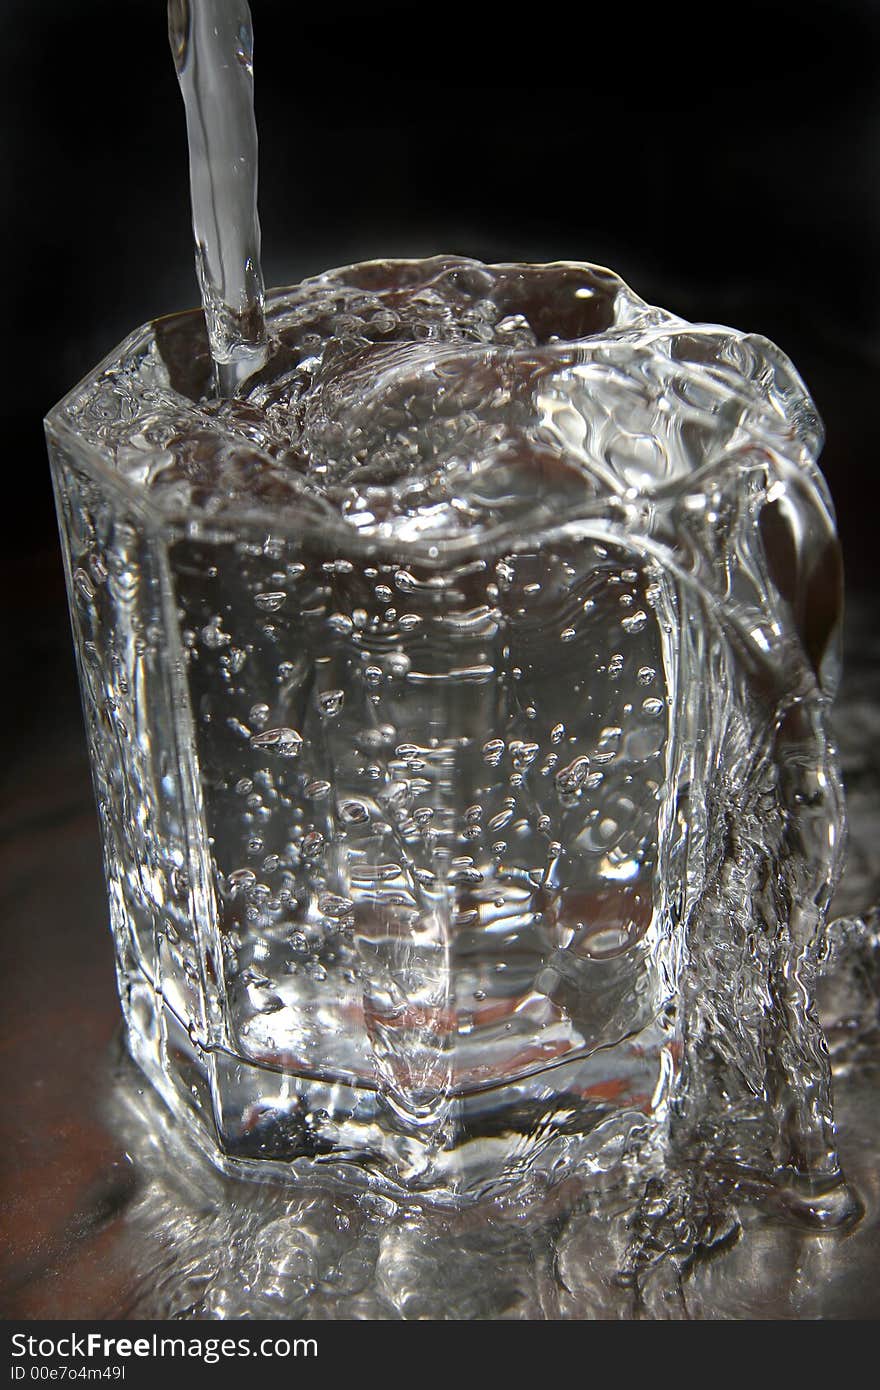 Jet of water flowing in the filled thick glass tumbler. Jet of water flowing in the filled thick glass tumbler.